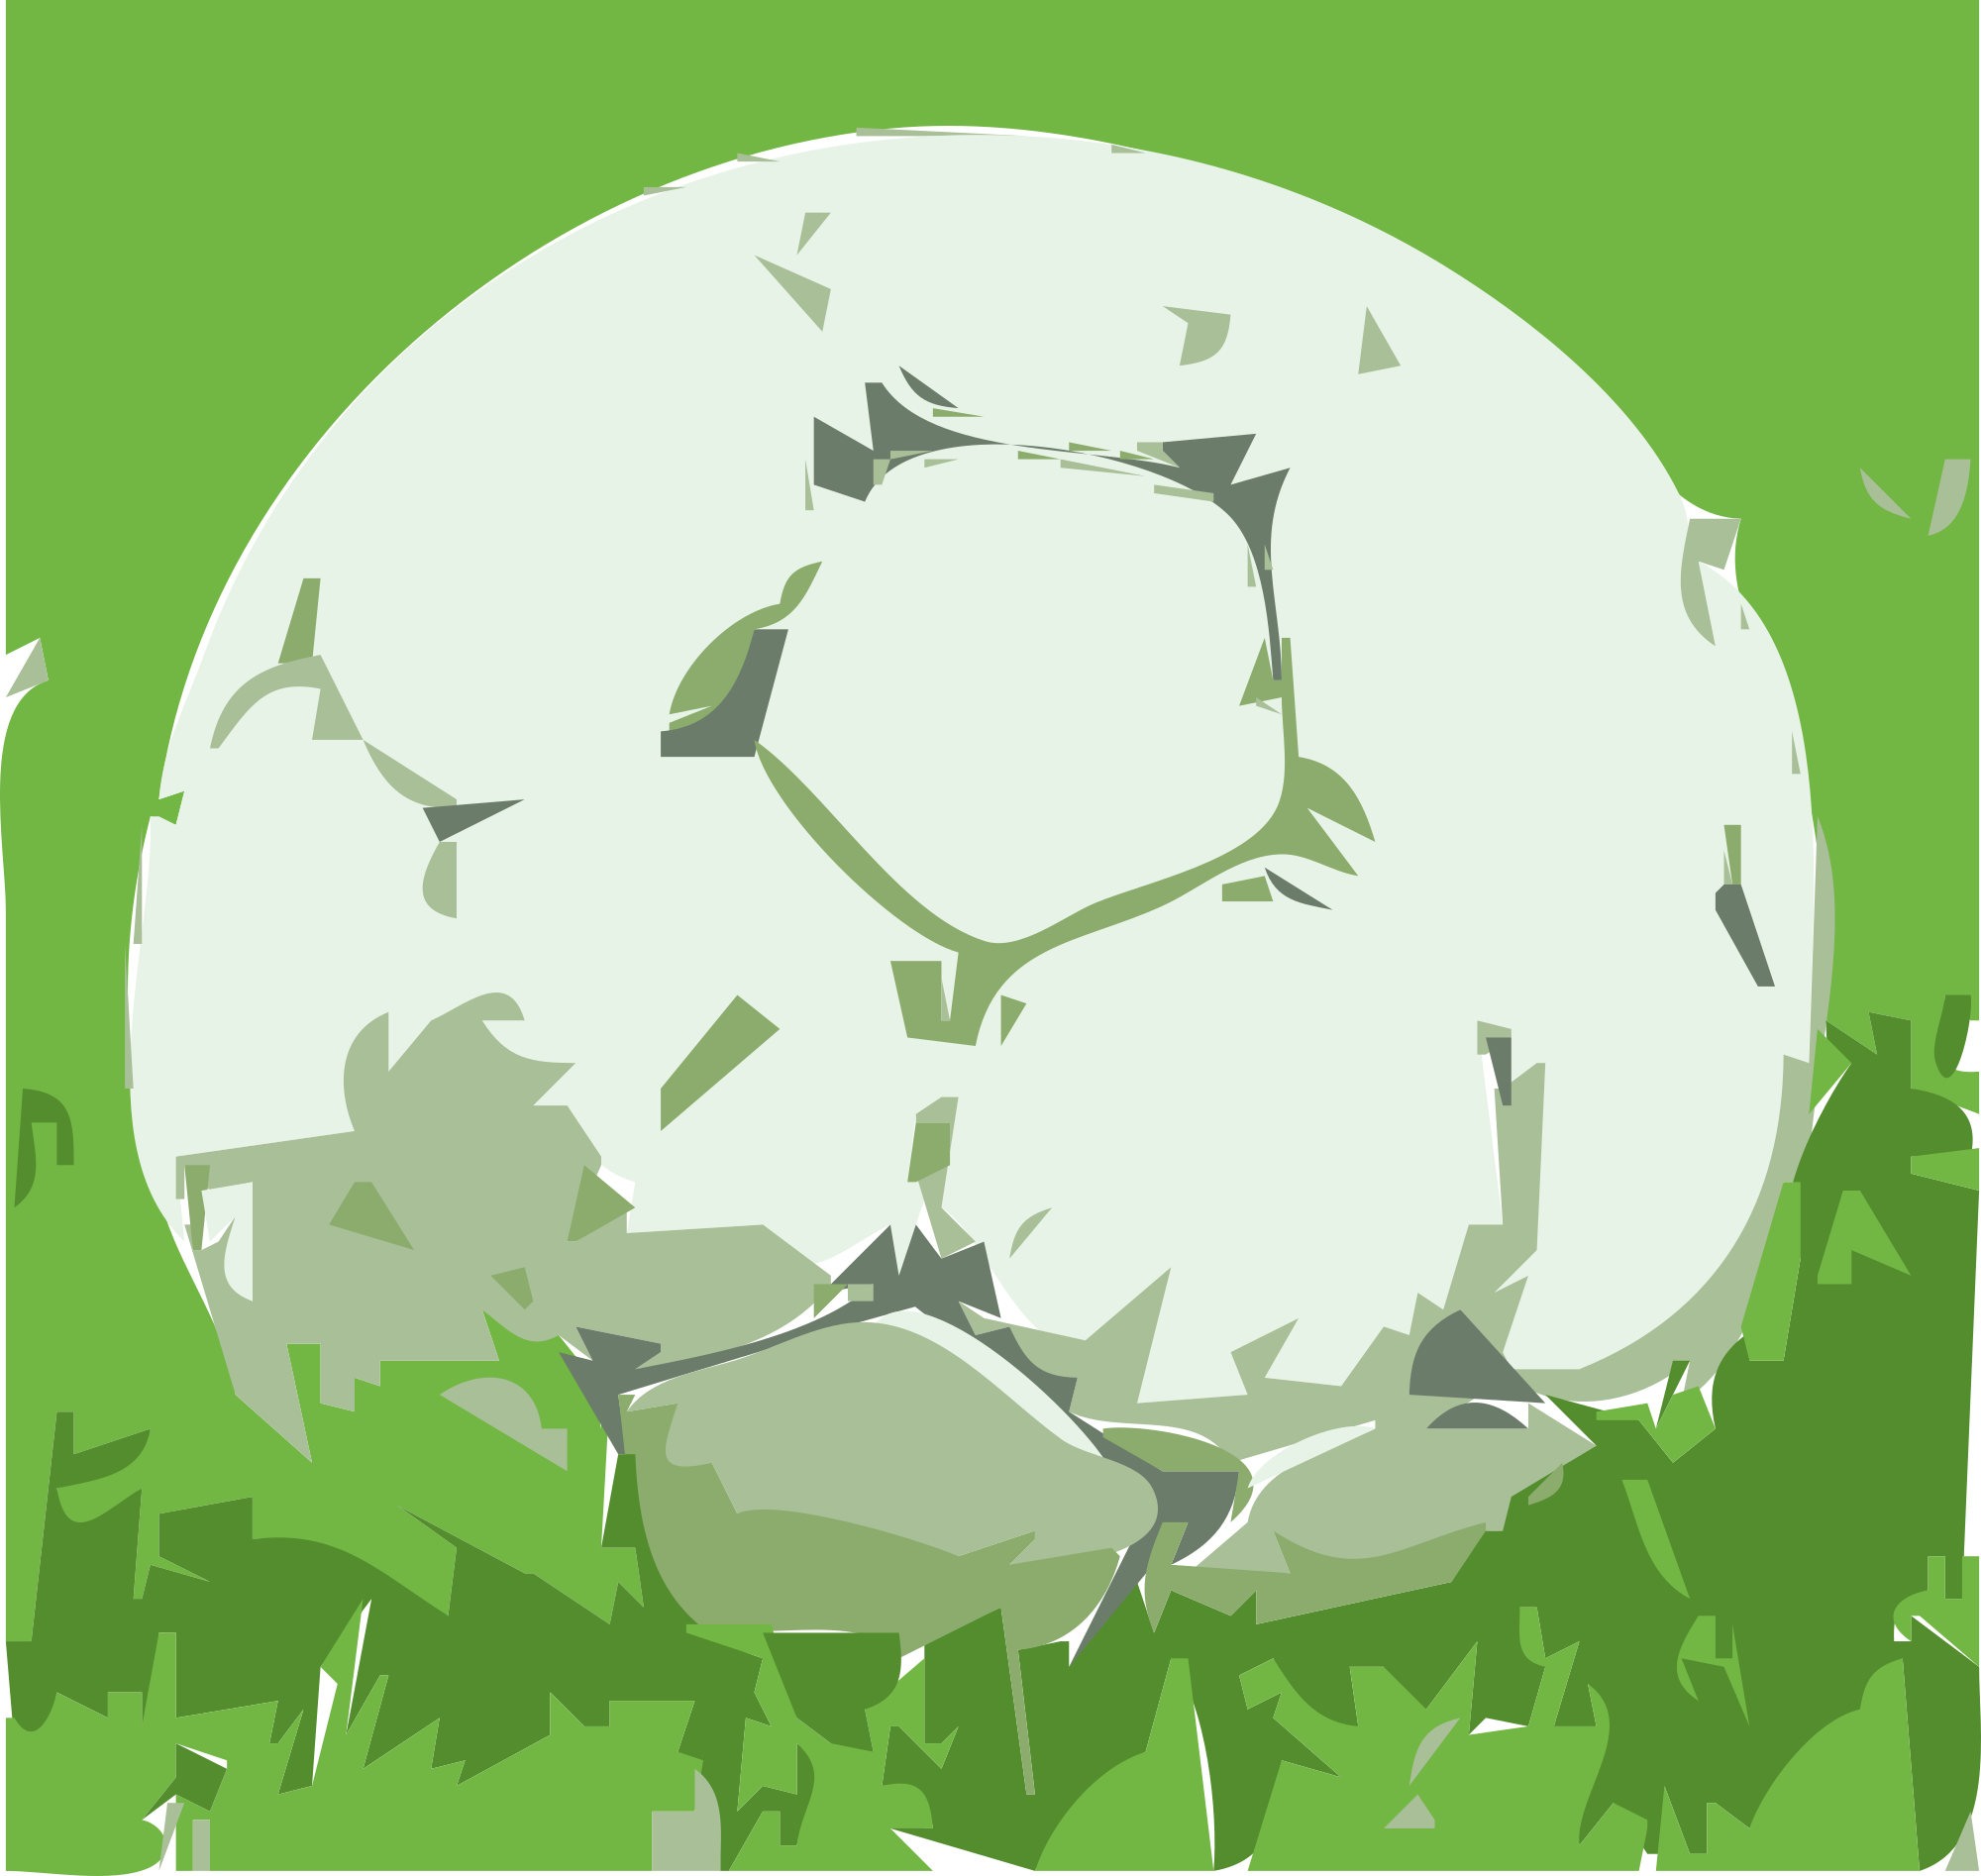 Free soccer ball on grass clipart and vector image